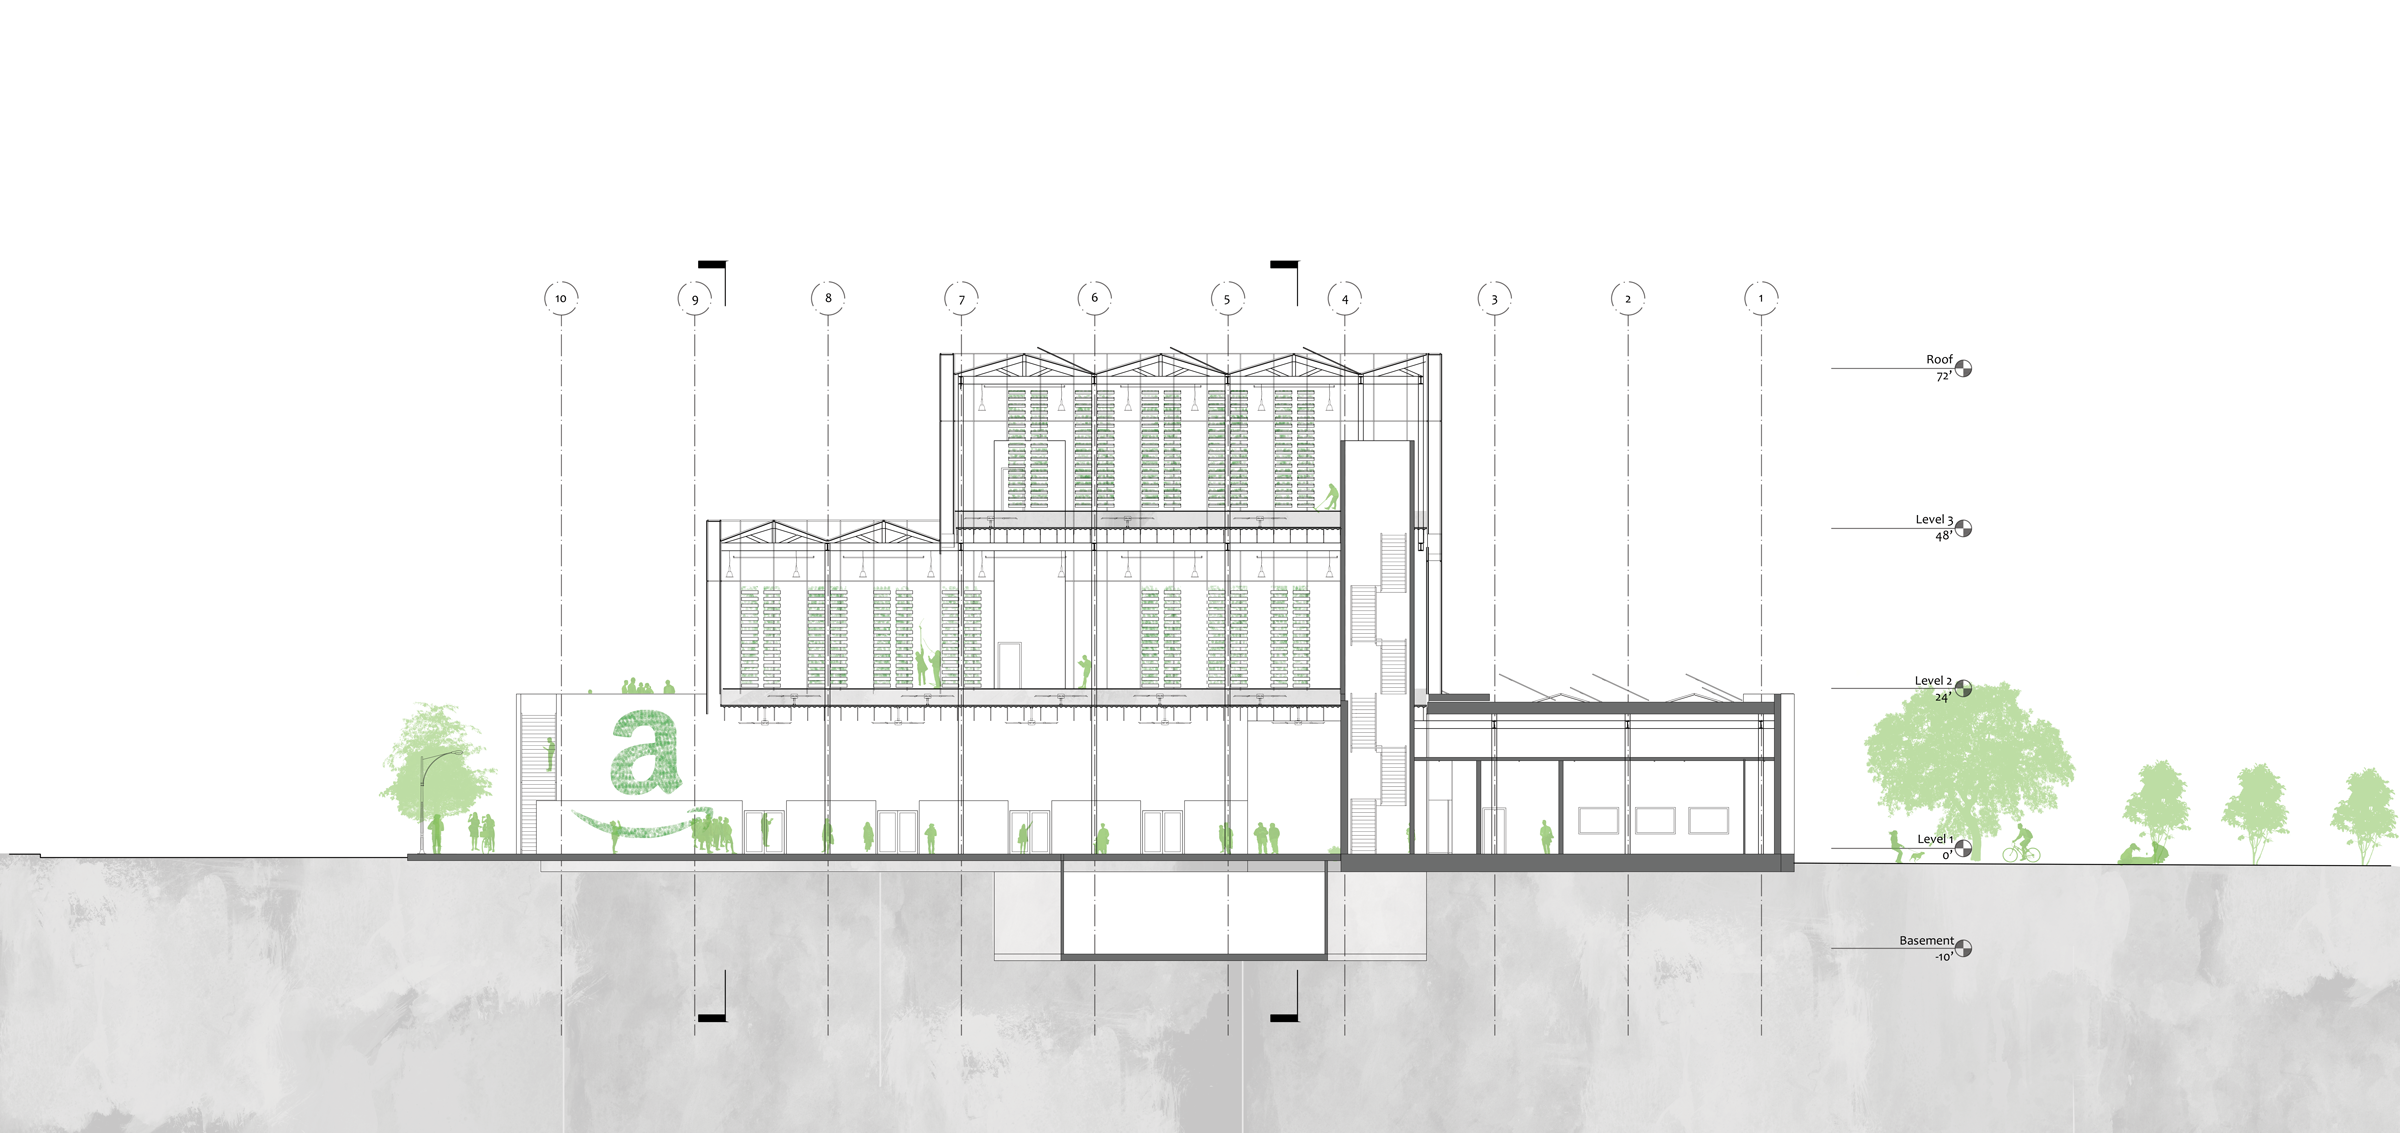  Section through exterior markets, overhanging productive aeroponics and hydroponics and  ground level offices 